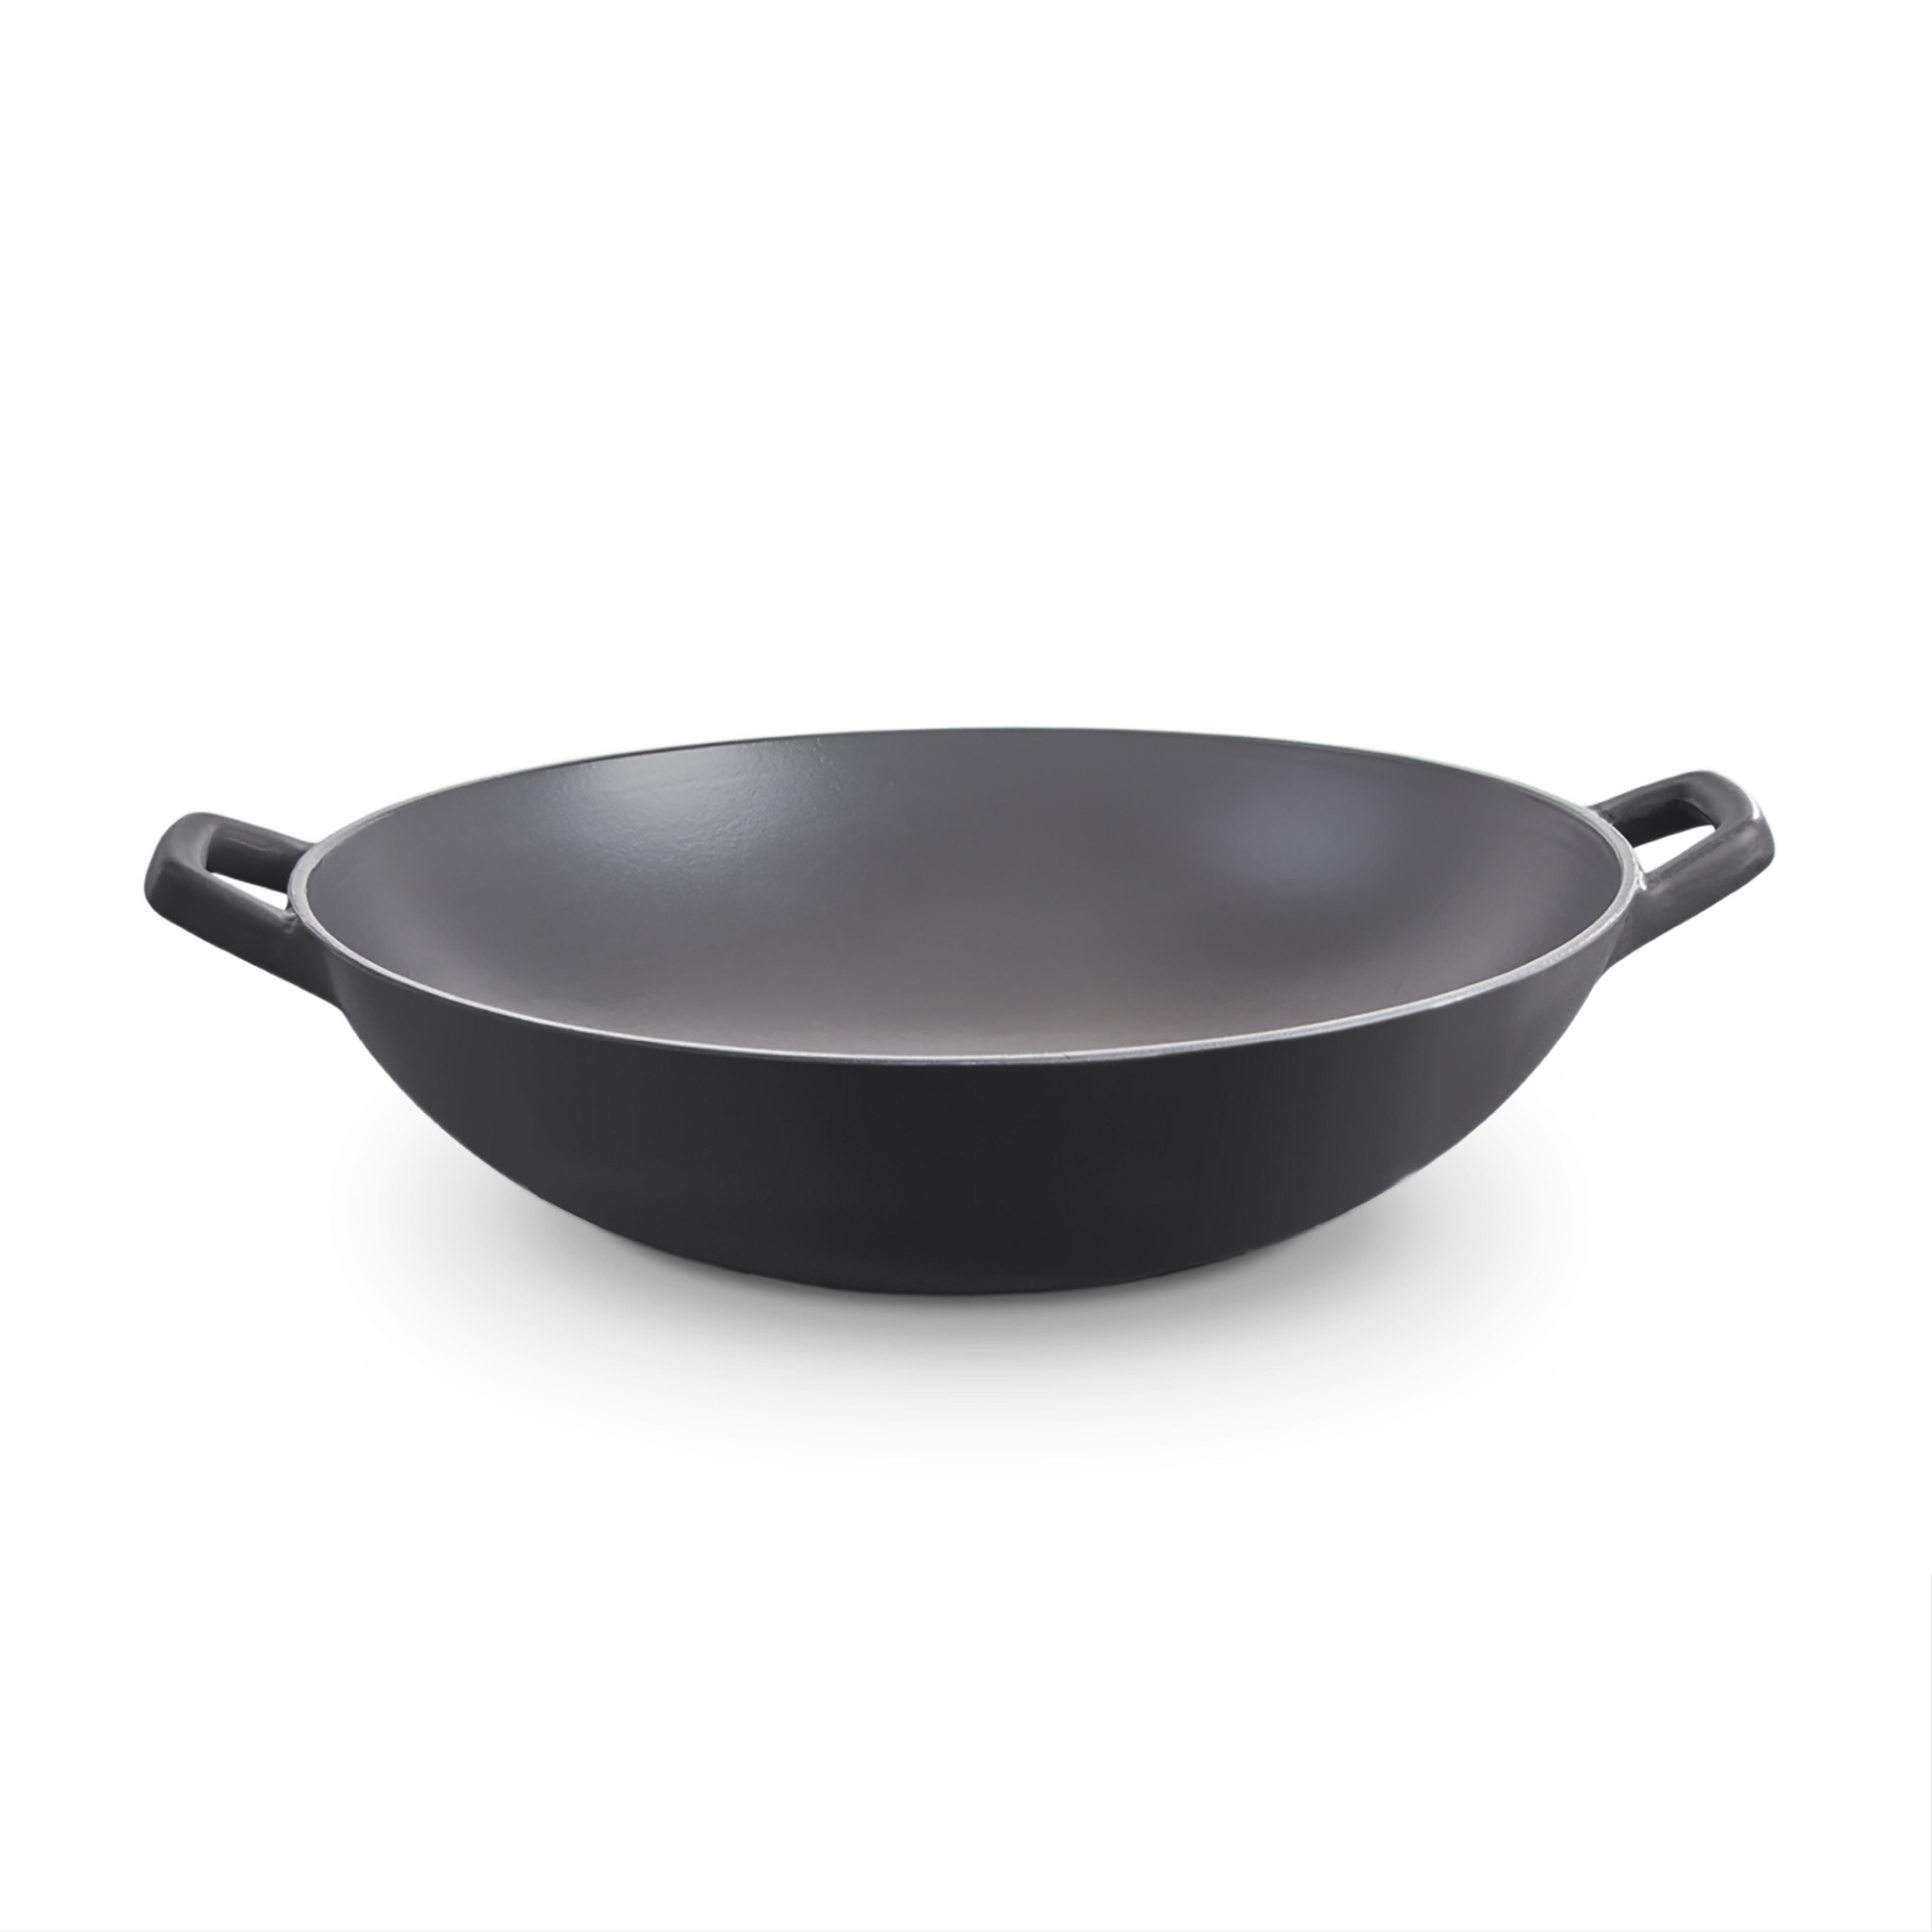 Zakarian by Dash 5th Anniversary 7.5 Cast Iron Skillet w/ Tool 